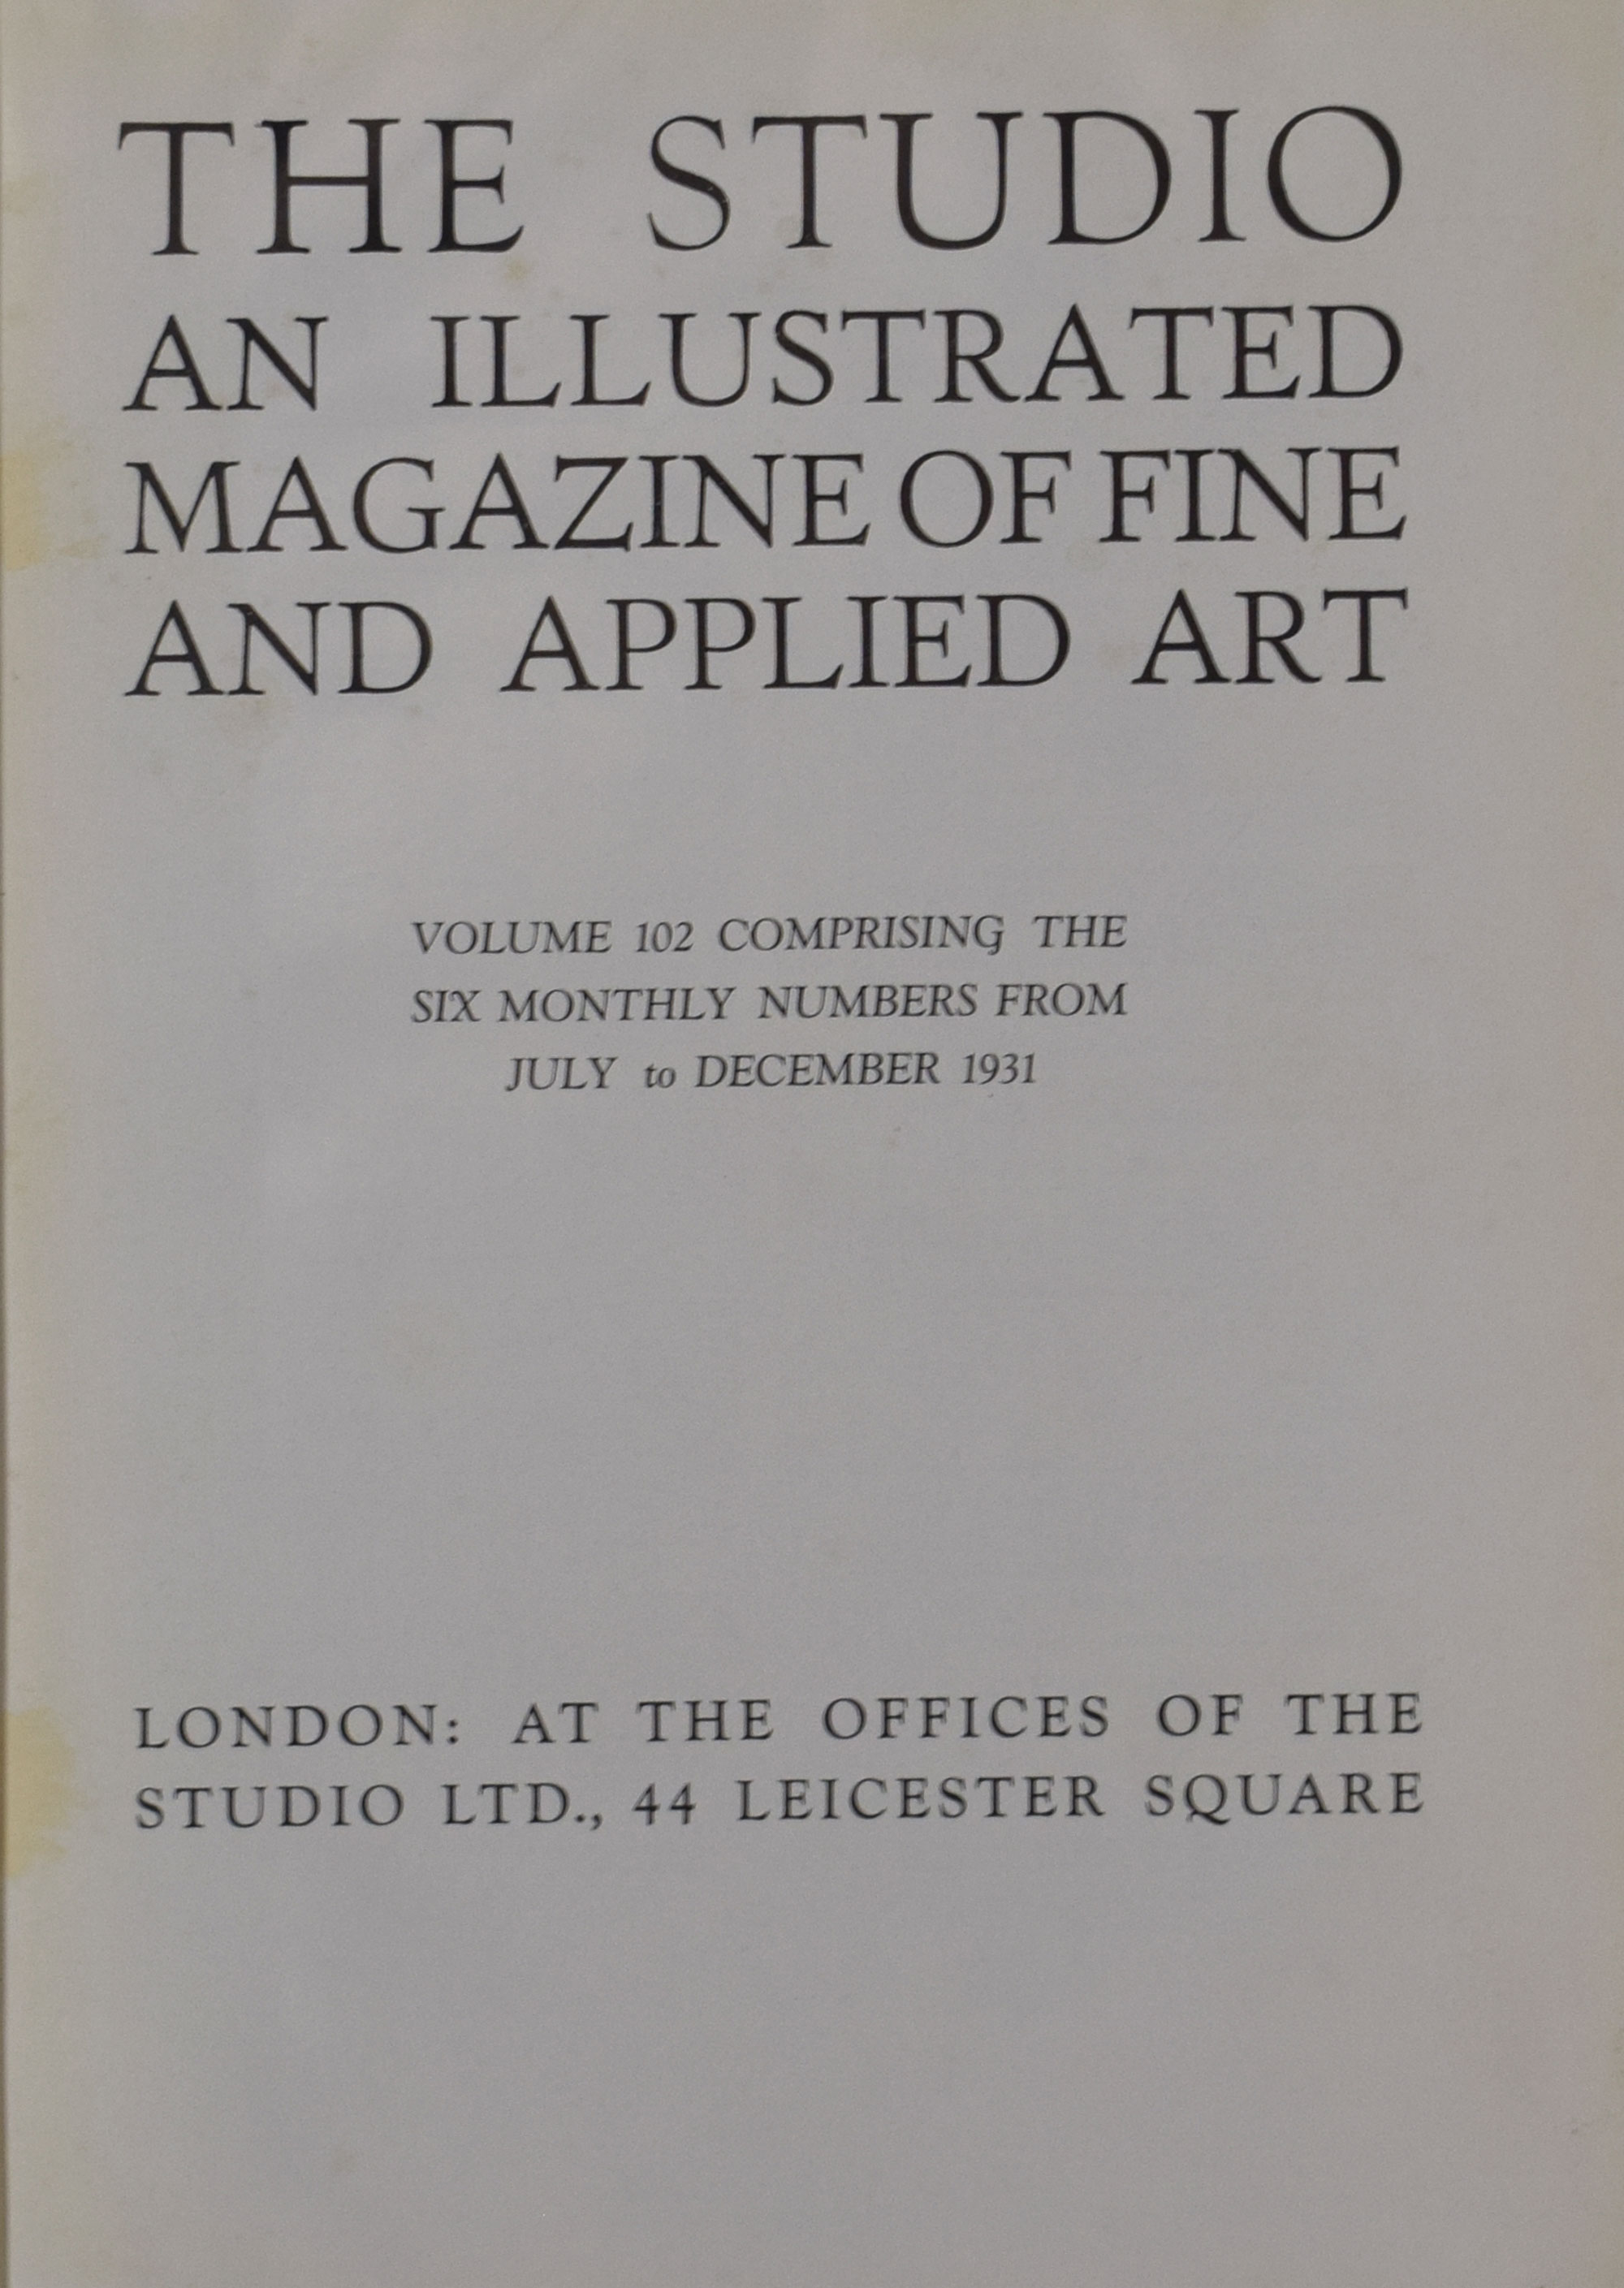 The Studio: An Illustrated Magazine of Fine and Applied Art. Volume 102. July-December 1931.